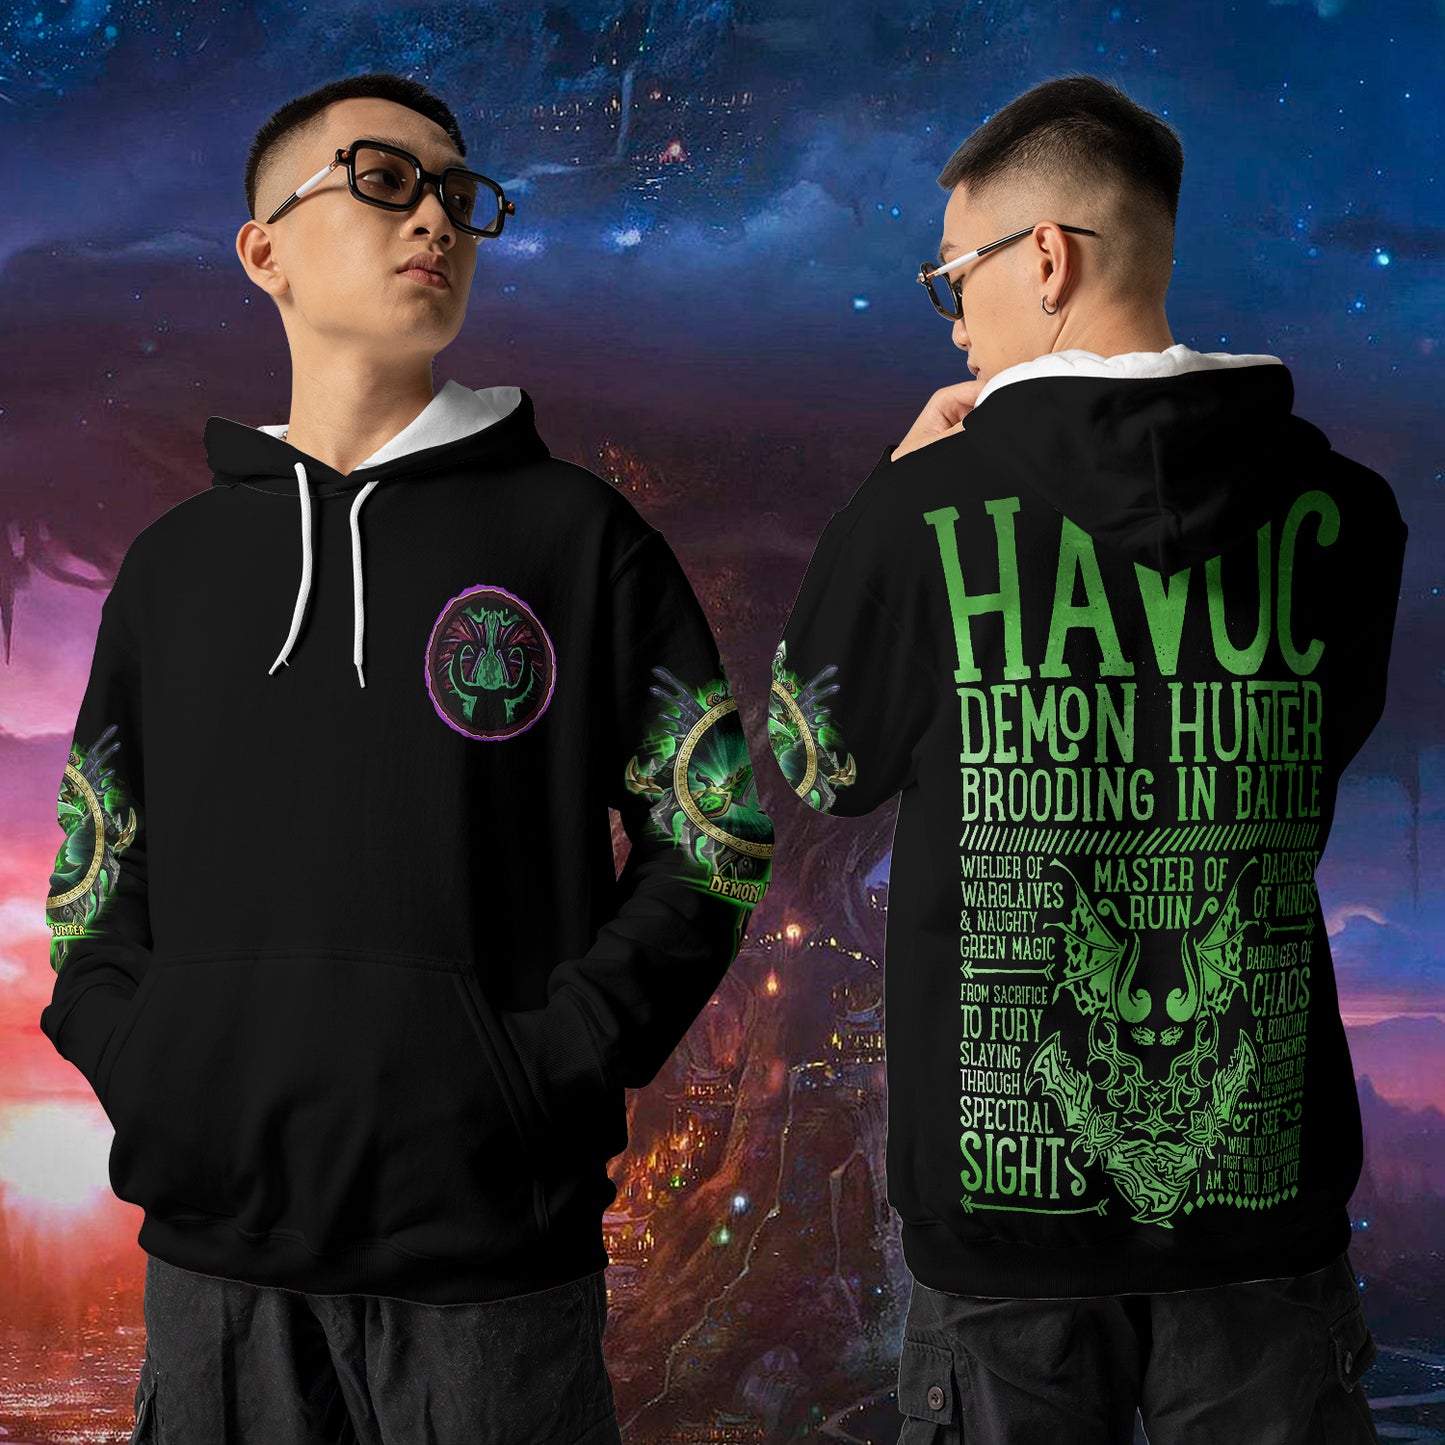 Havoc Demon Hunter - WoW Class Guide V3 - All-over Print Hoodie